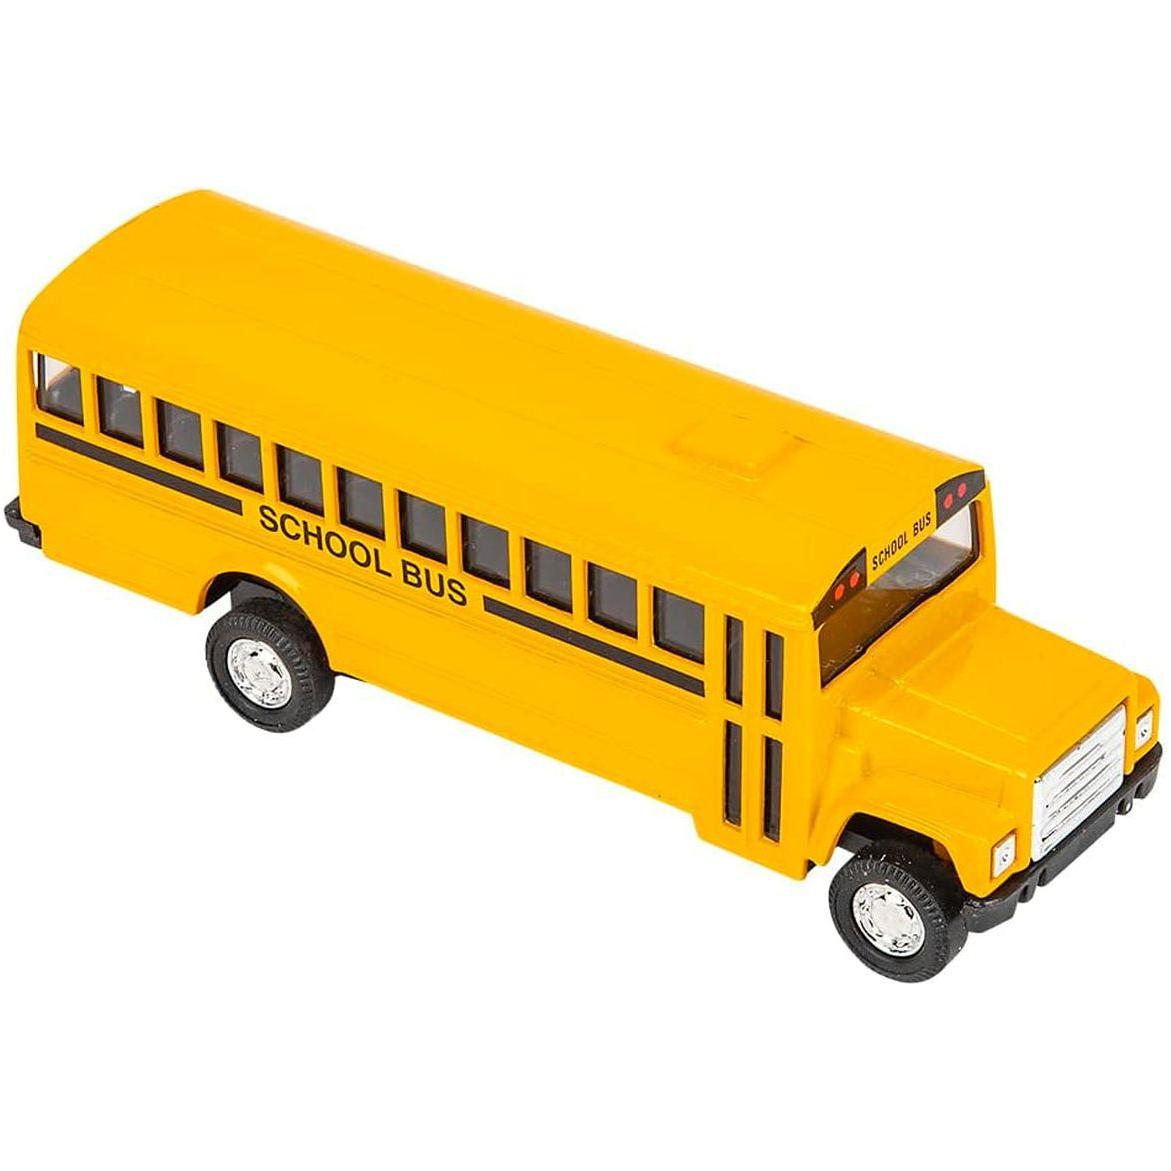 5 Inch Die Cast School Bus with Pull-Back Action, 1 per Order